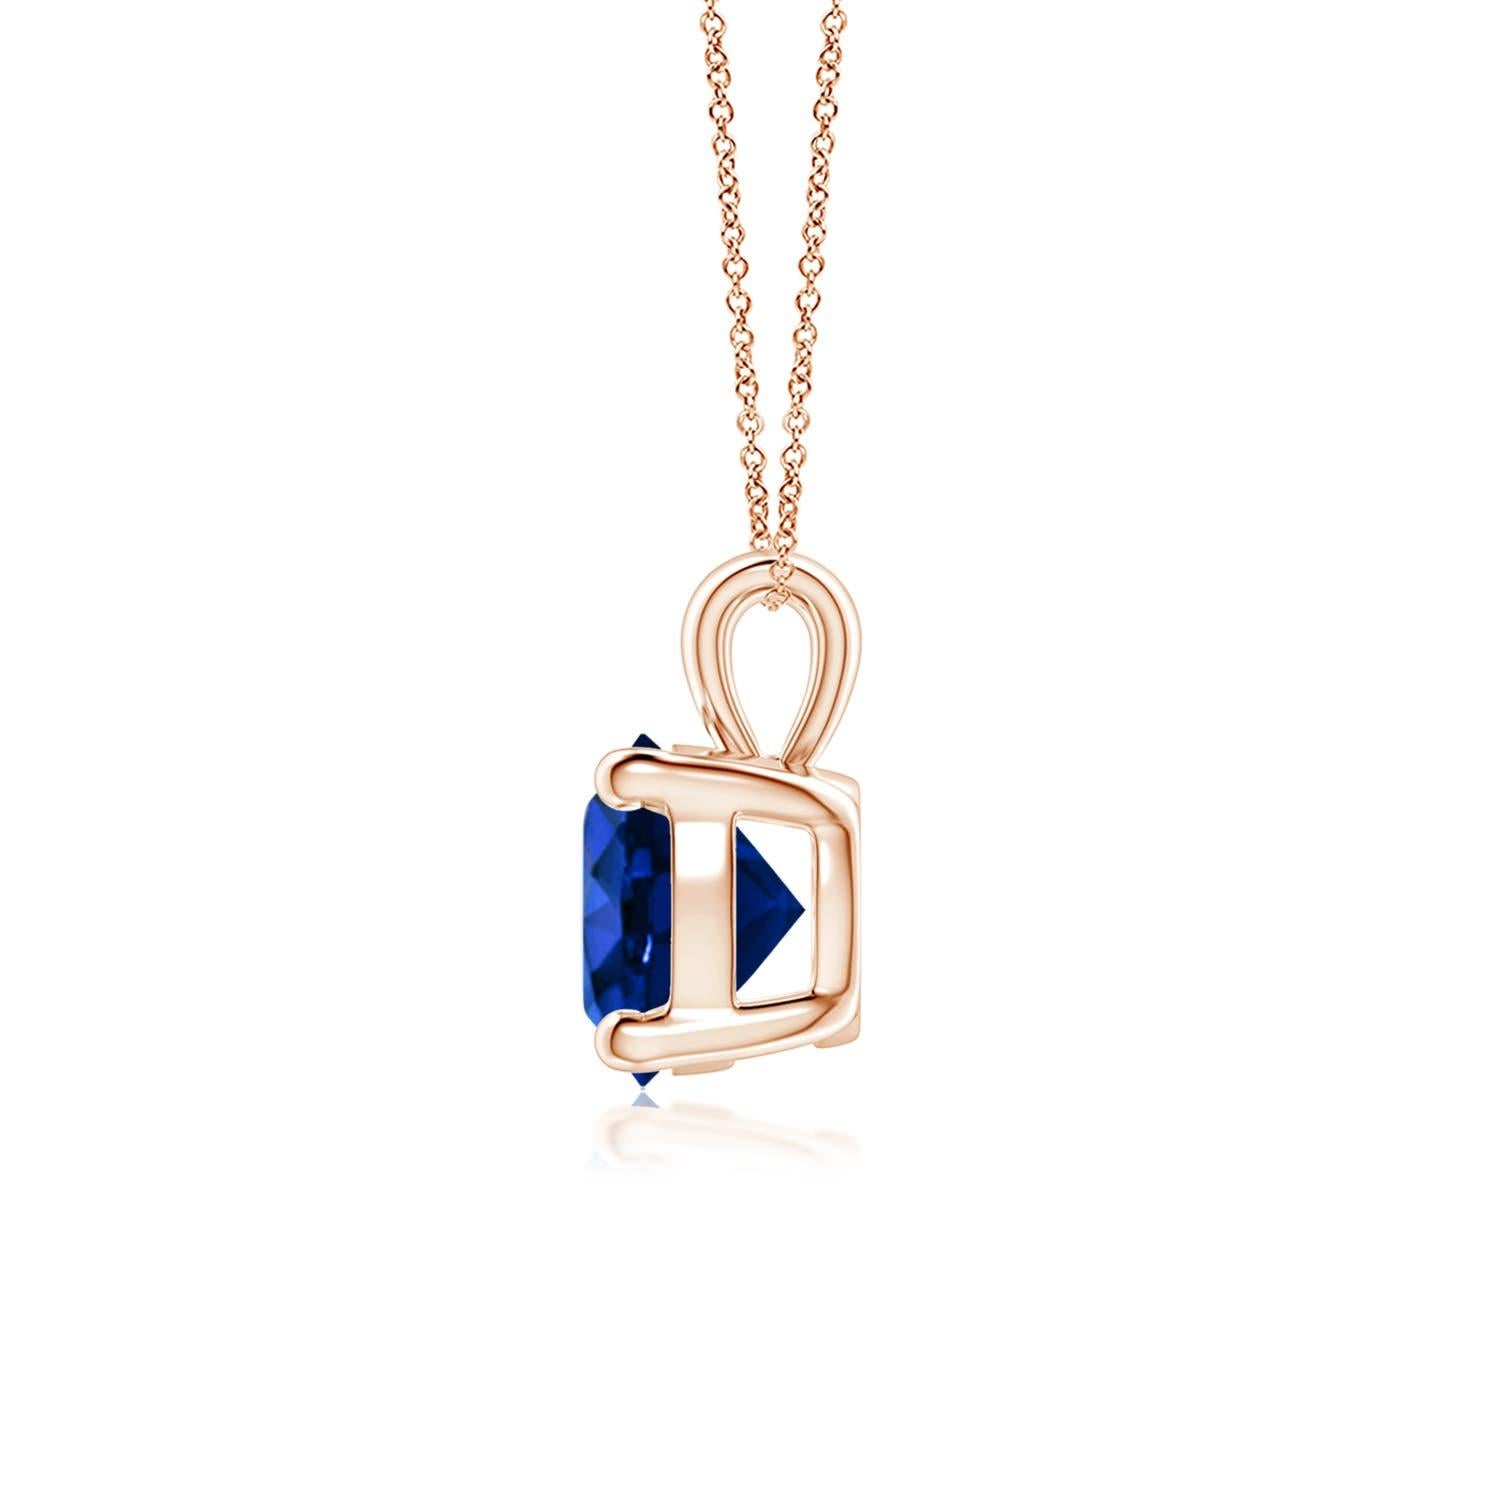 Linked to a lustrous bale is a stunning sapphire solitaire secured in a four prong setting. Crafted in 14k rose gold, the elegant design of this classic sapphire pendant draws all attention towards the magnificence of the center stone.
Blue Sapphire